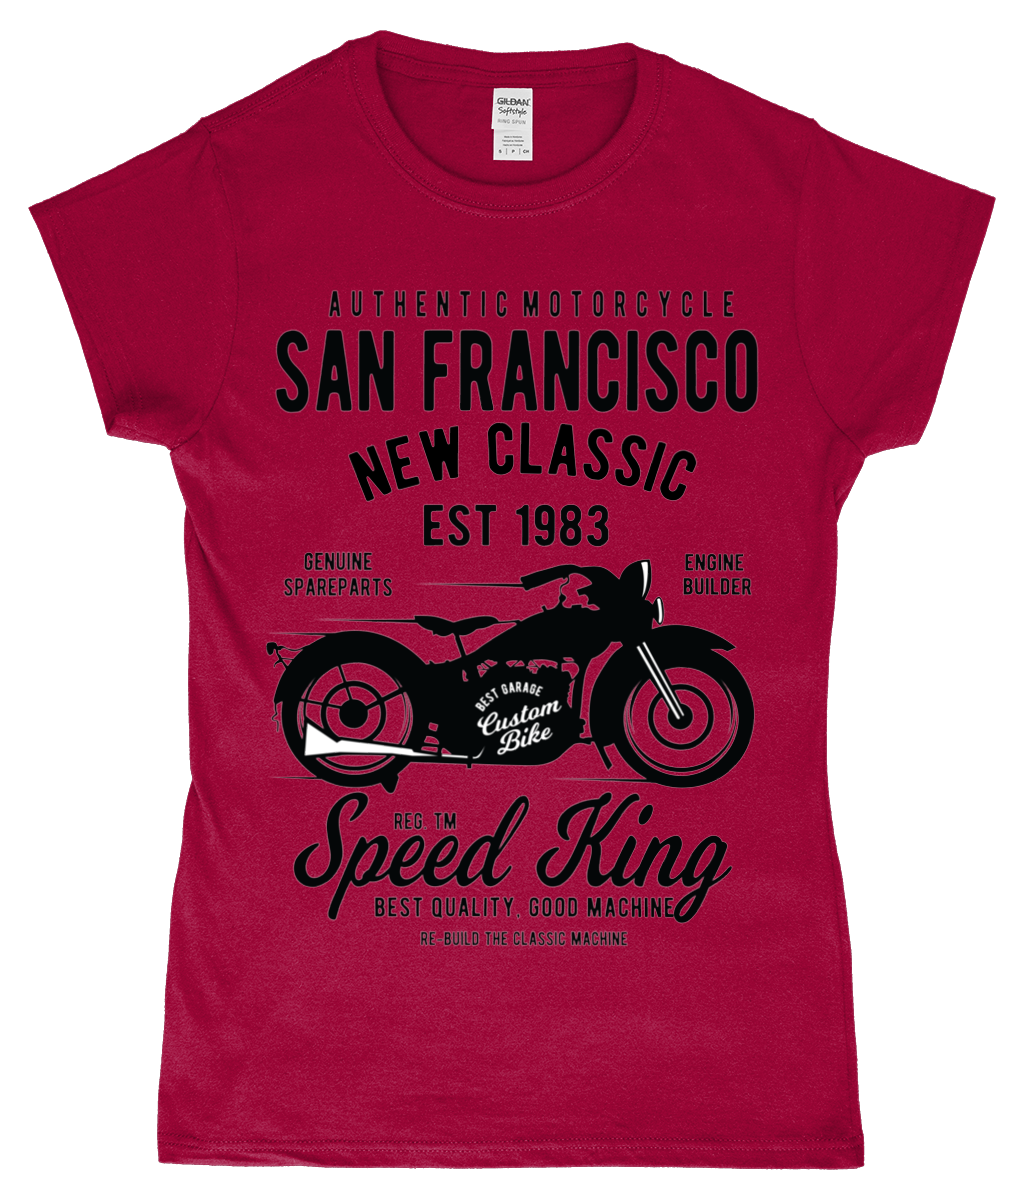 San Francisco Motorcycle – Gildan Softstyle® Ladies Fitted Ringspun T-shirt